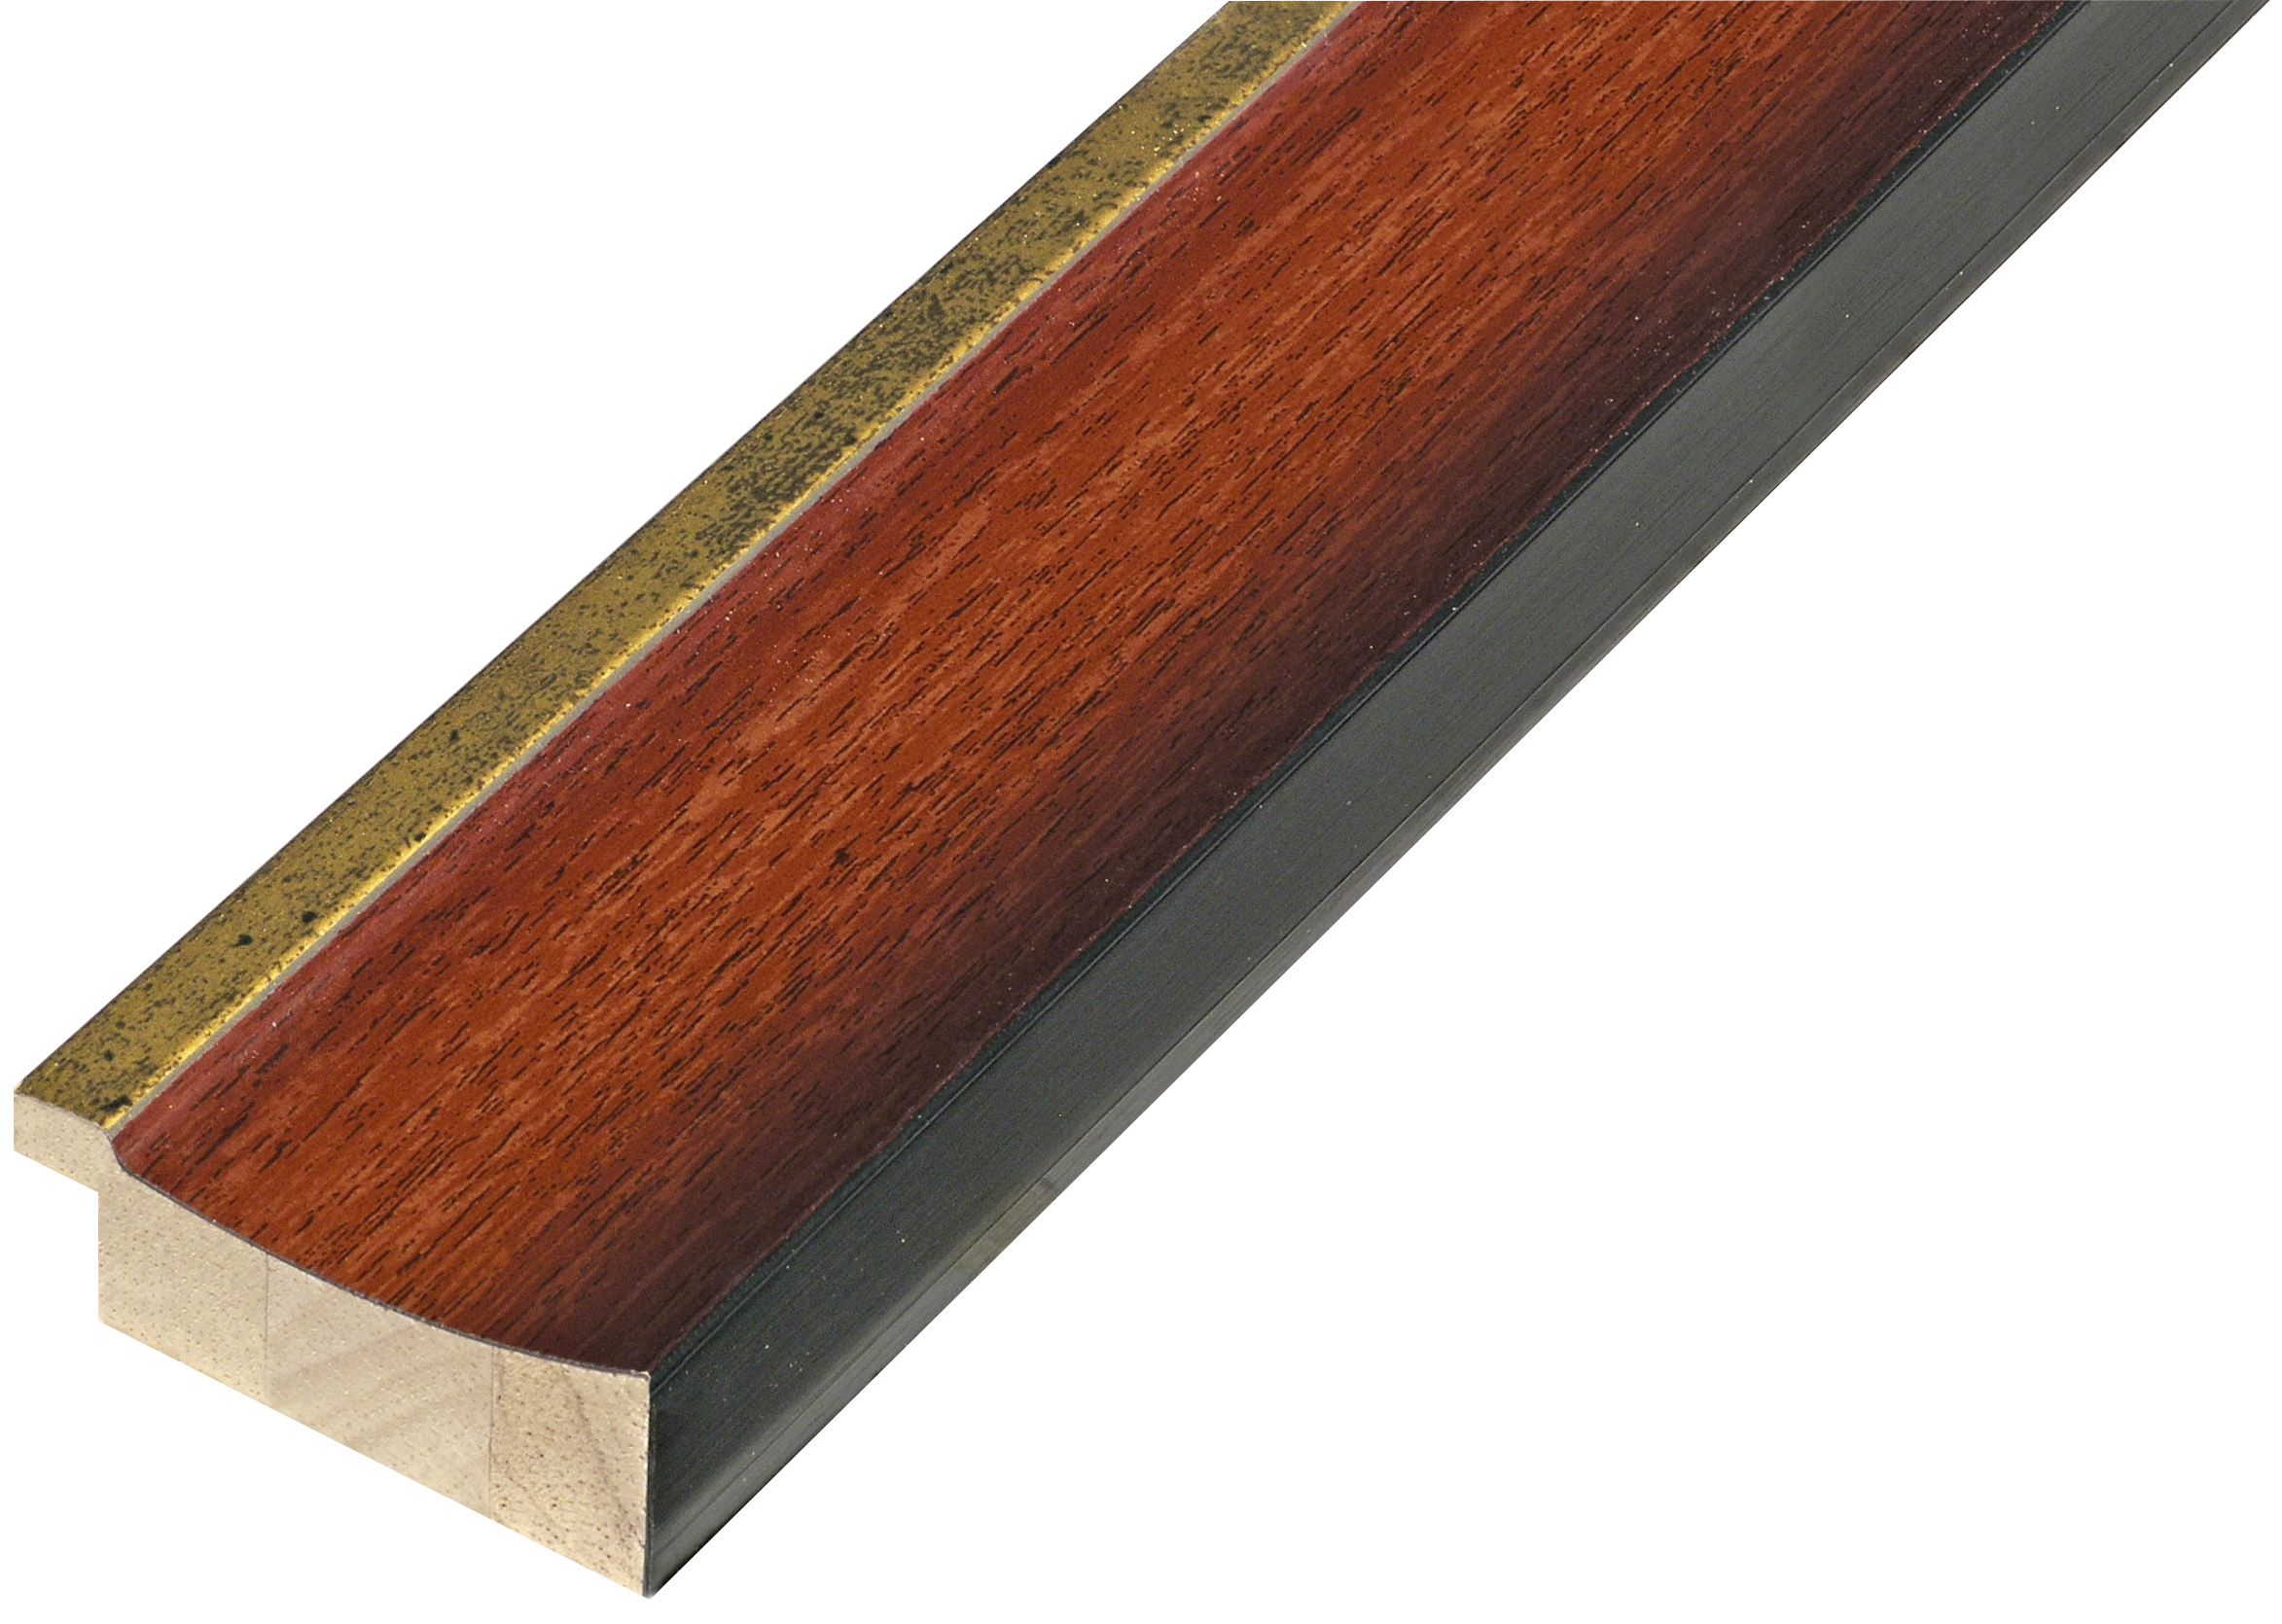 Moulding finger-jointed pine - Width 50mm - Mahogany, gold sight edge  - 535MOGANO